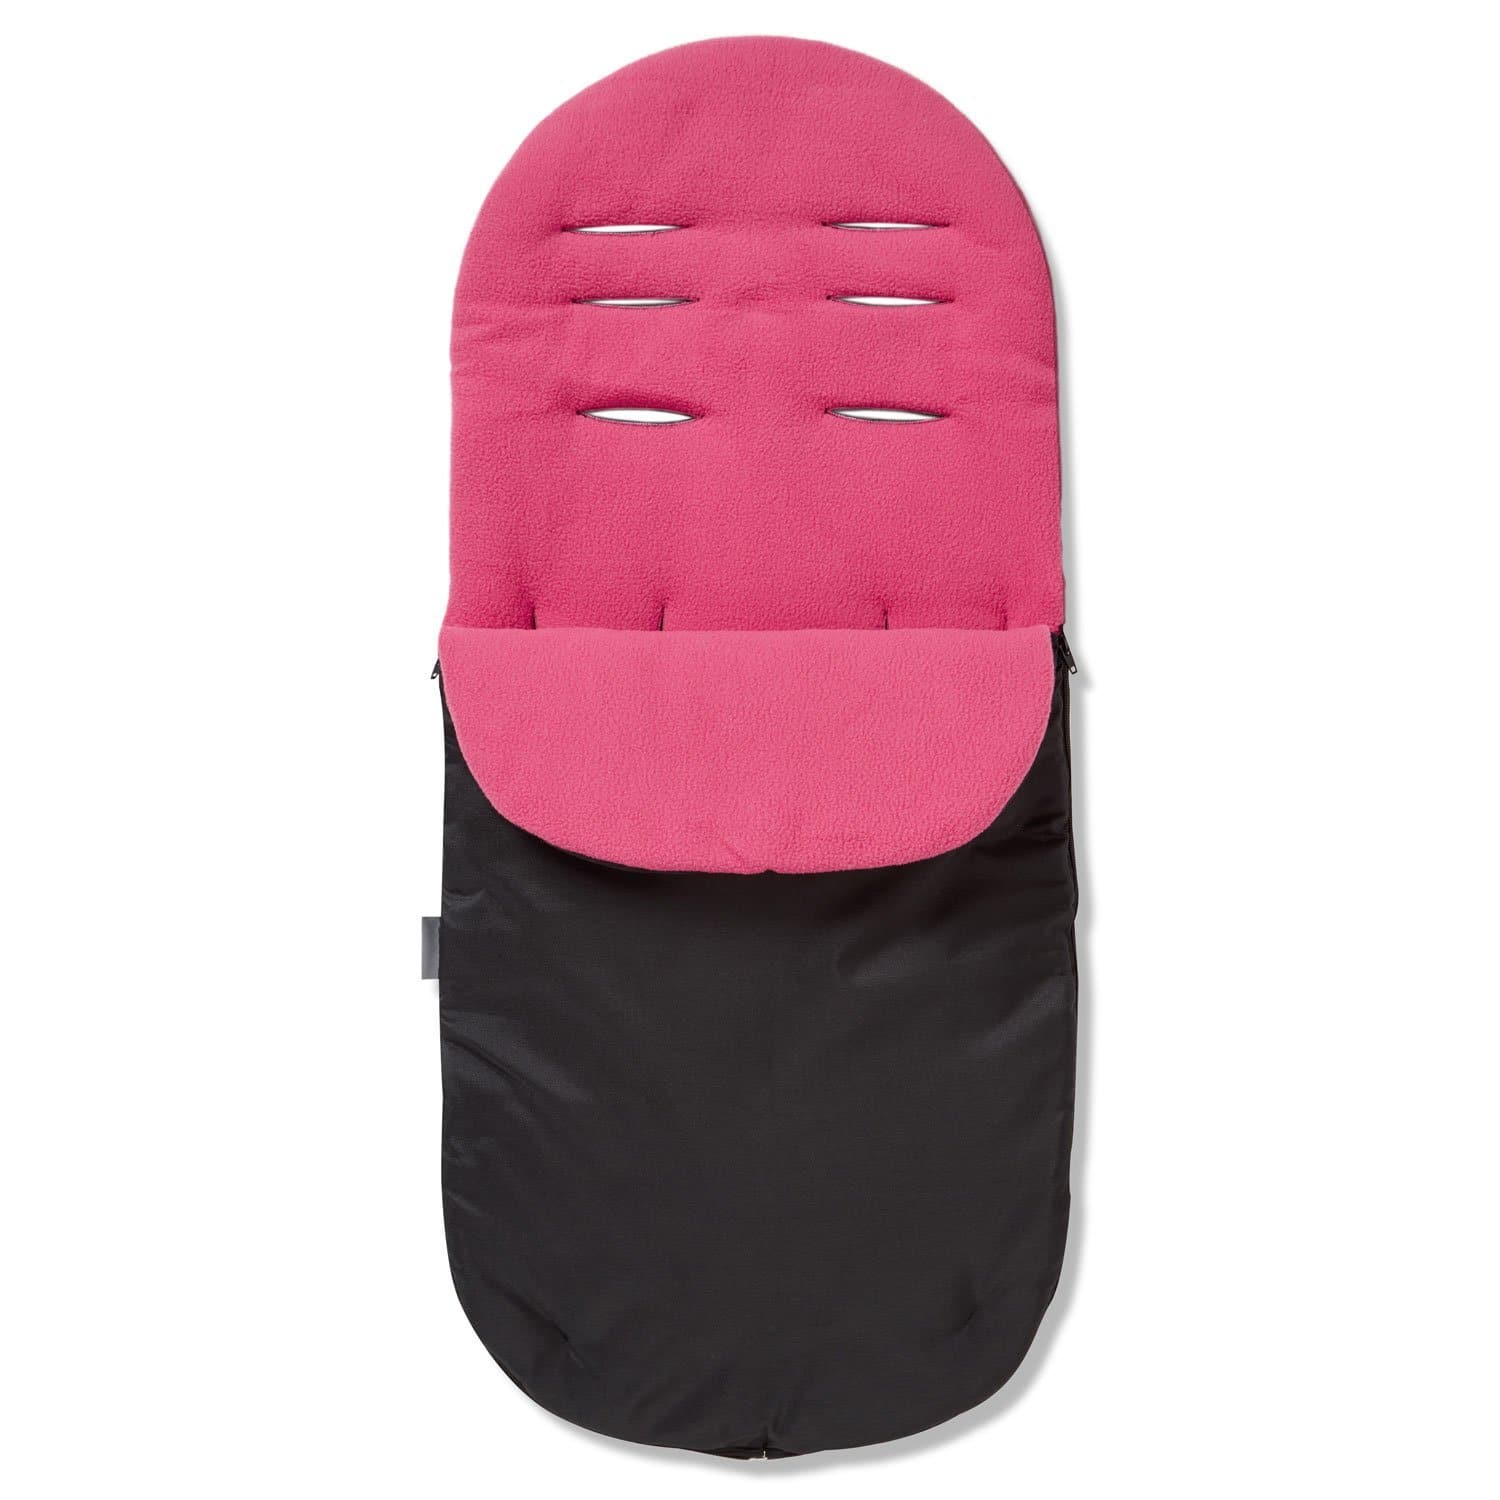 Footmuff / Cosy Toes Compatible with Mountain Buggy - Dark Pink / Fits All Models | For Your Little One